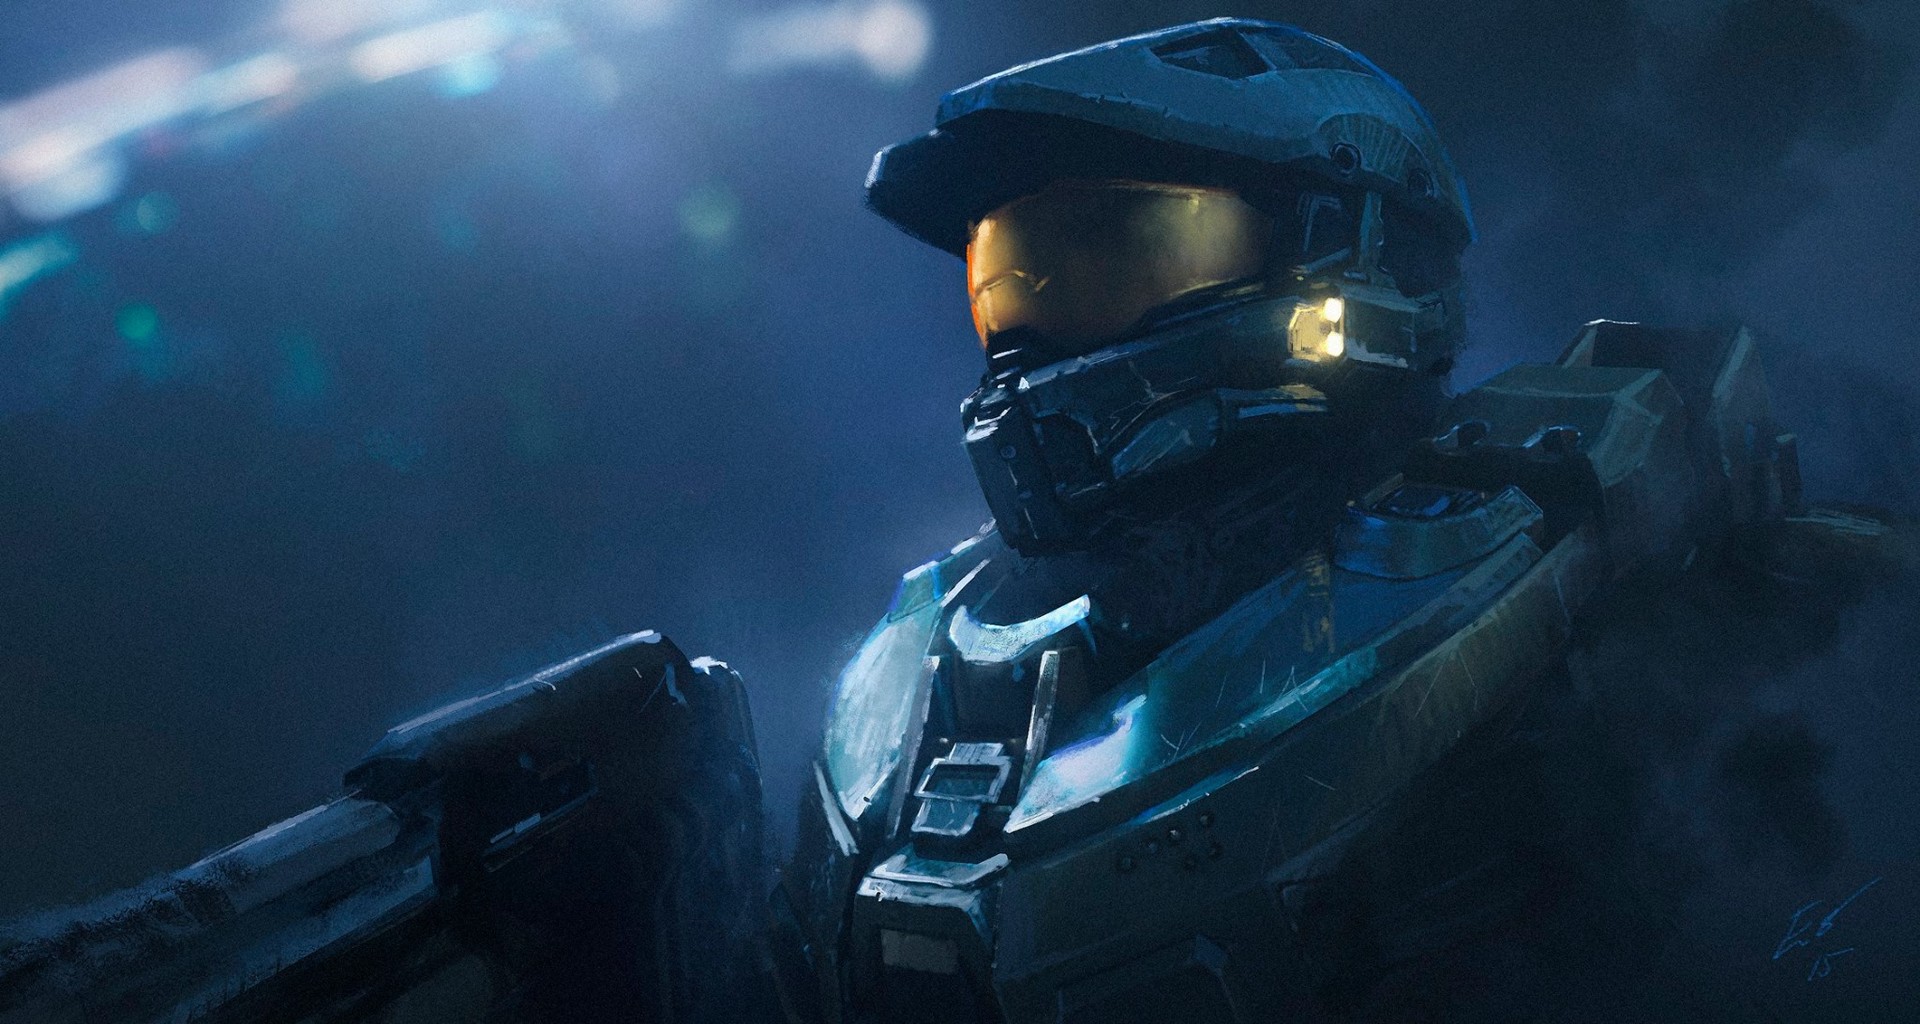 Halo 4 Halo 5 Guardians Video Games 1920x1024